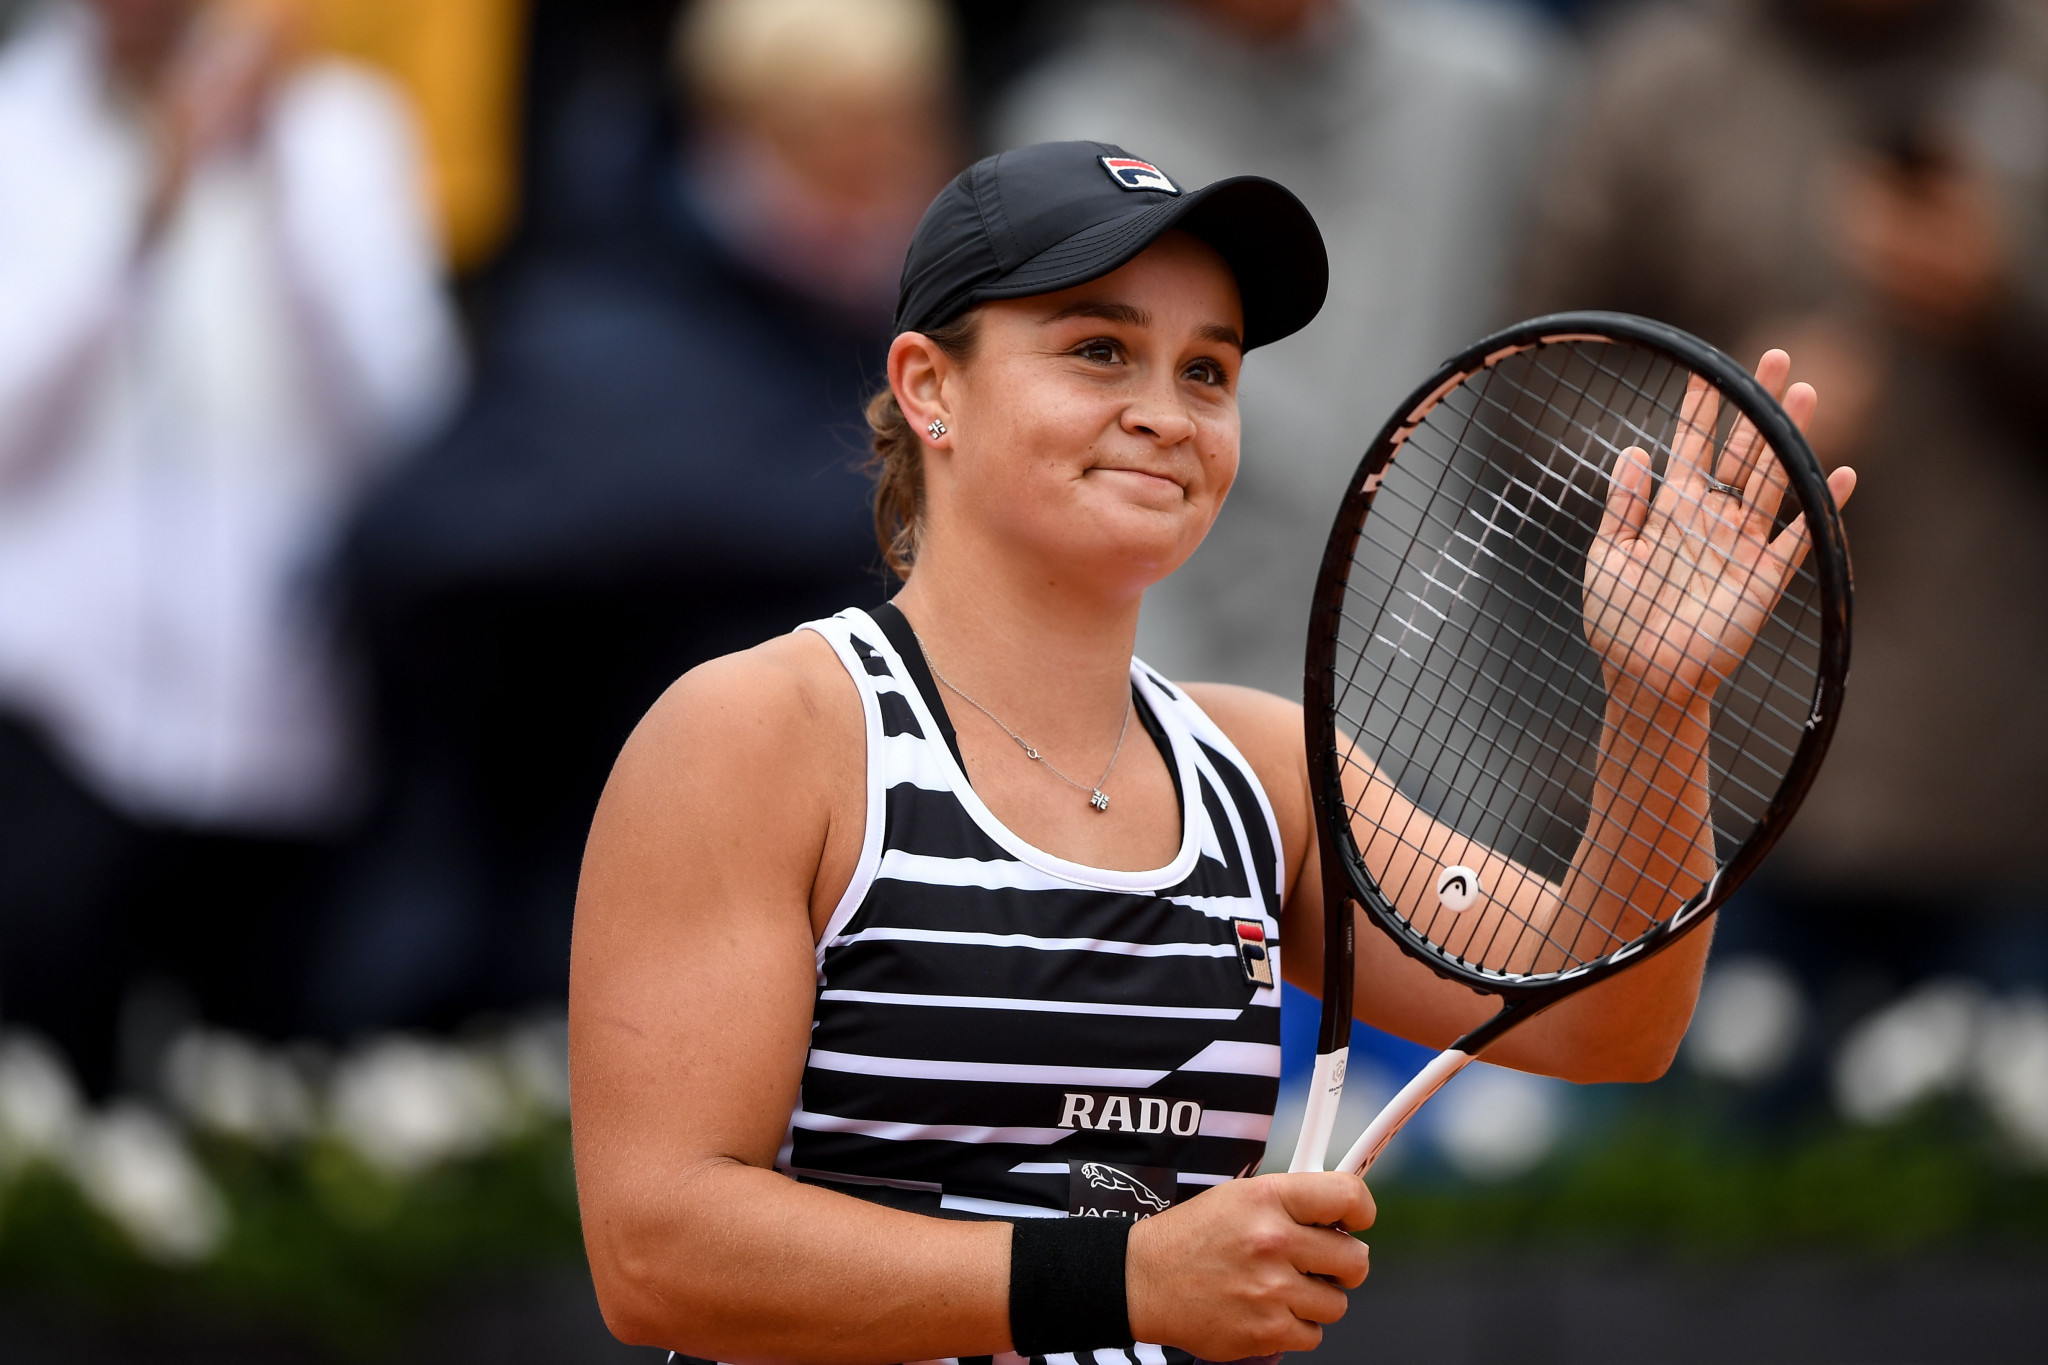 It was all smiles for Australian eighth seed Ashleigh Barty as she reached her first Grand Slam final ©Getty Images